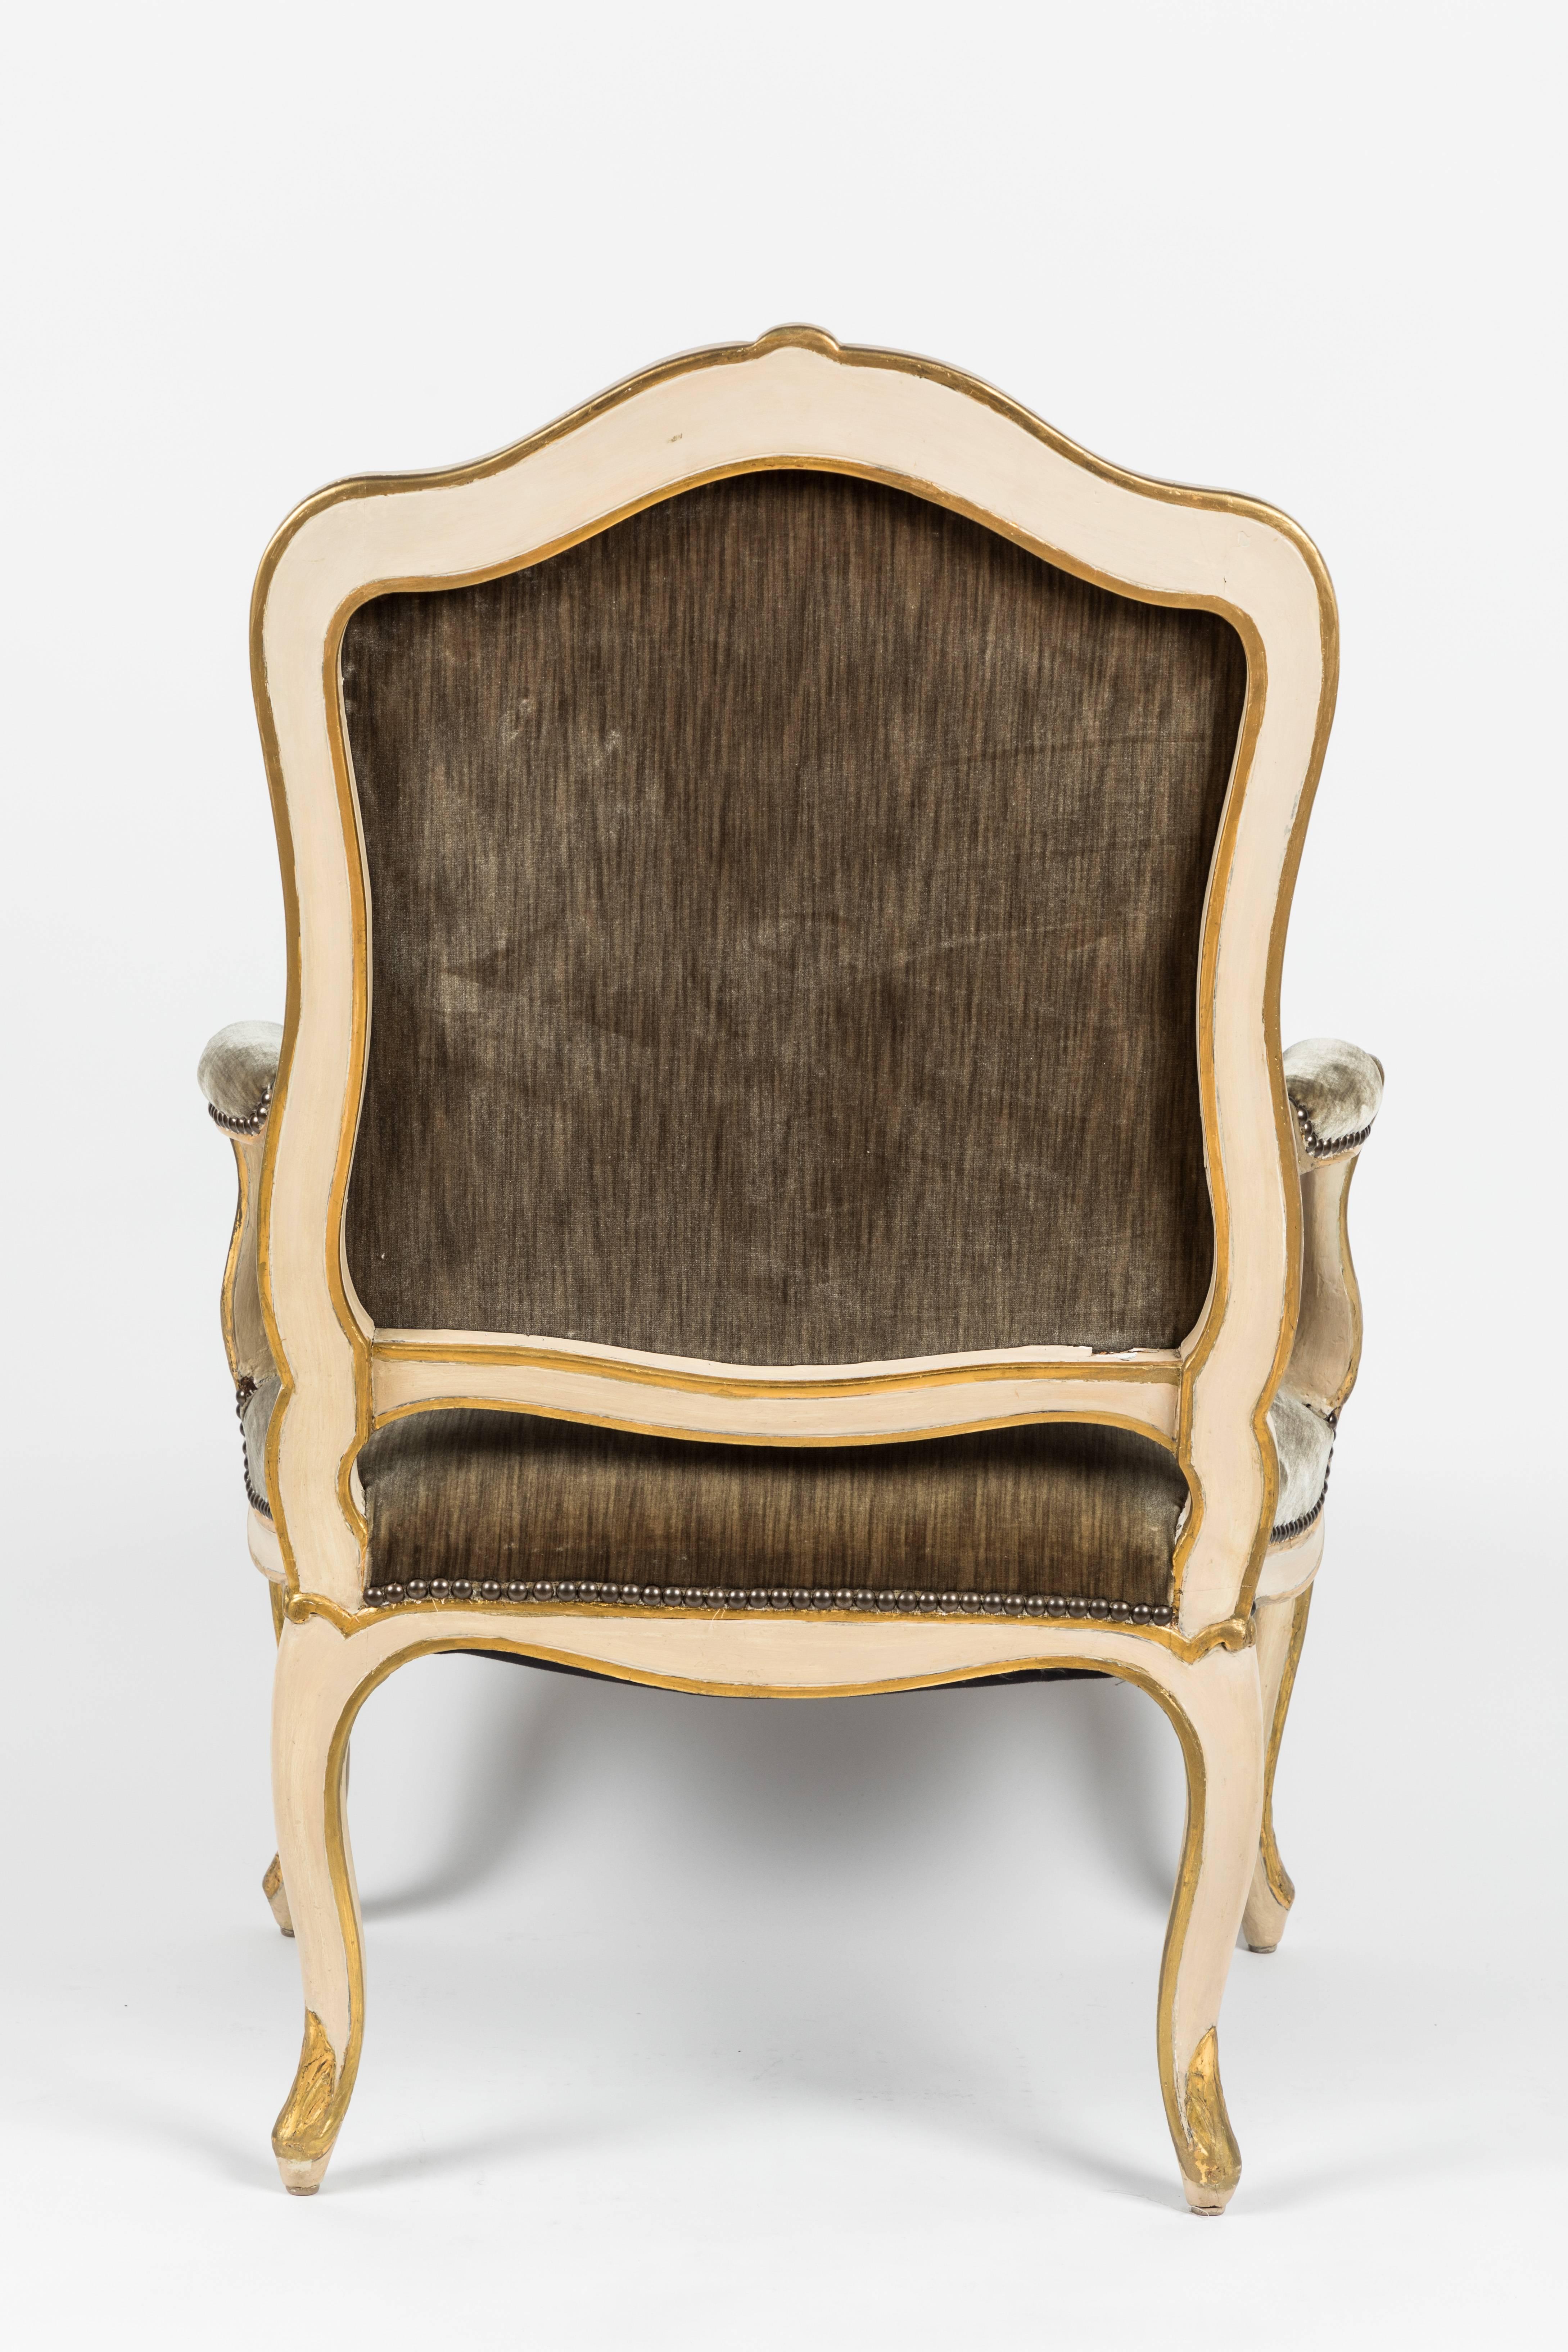 Polychromed 19th Century Louis XV Style Fauteuil Chair